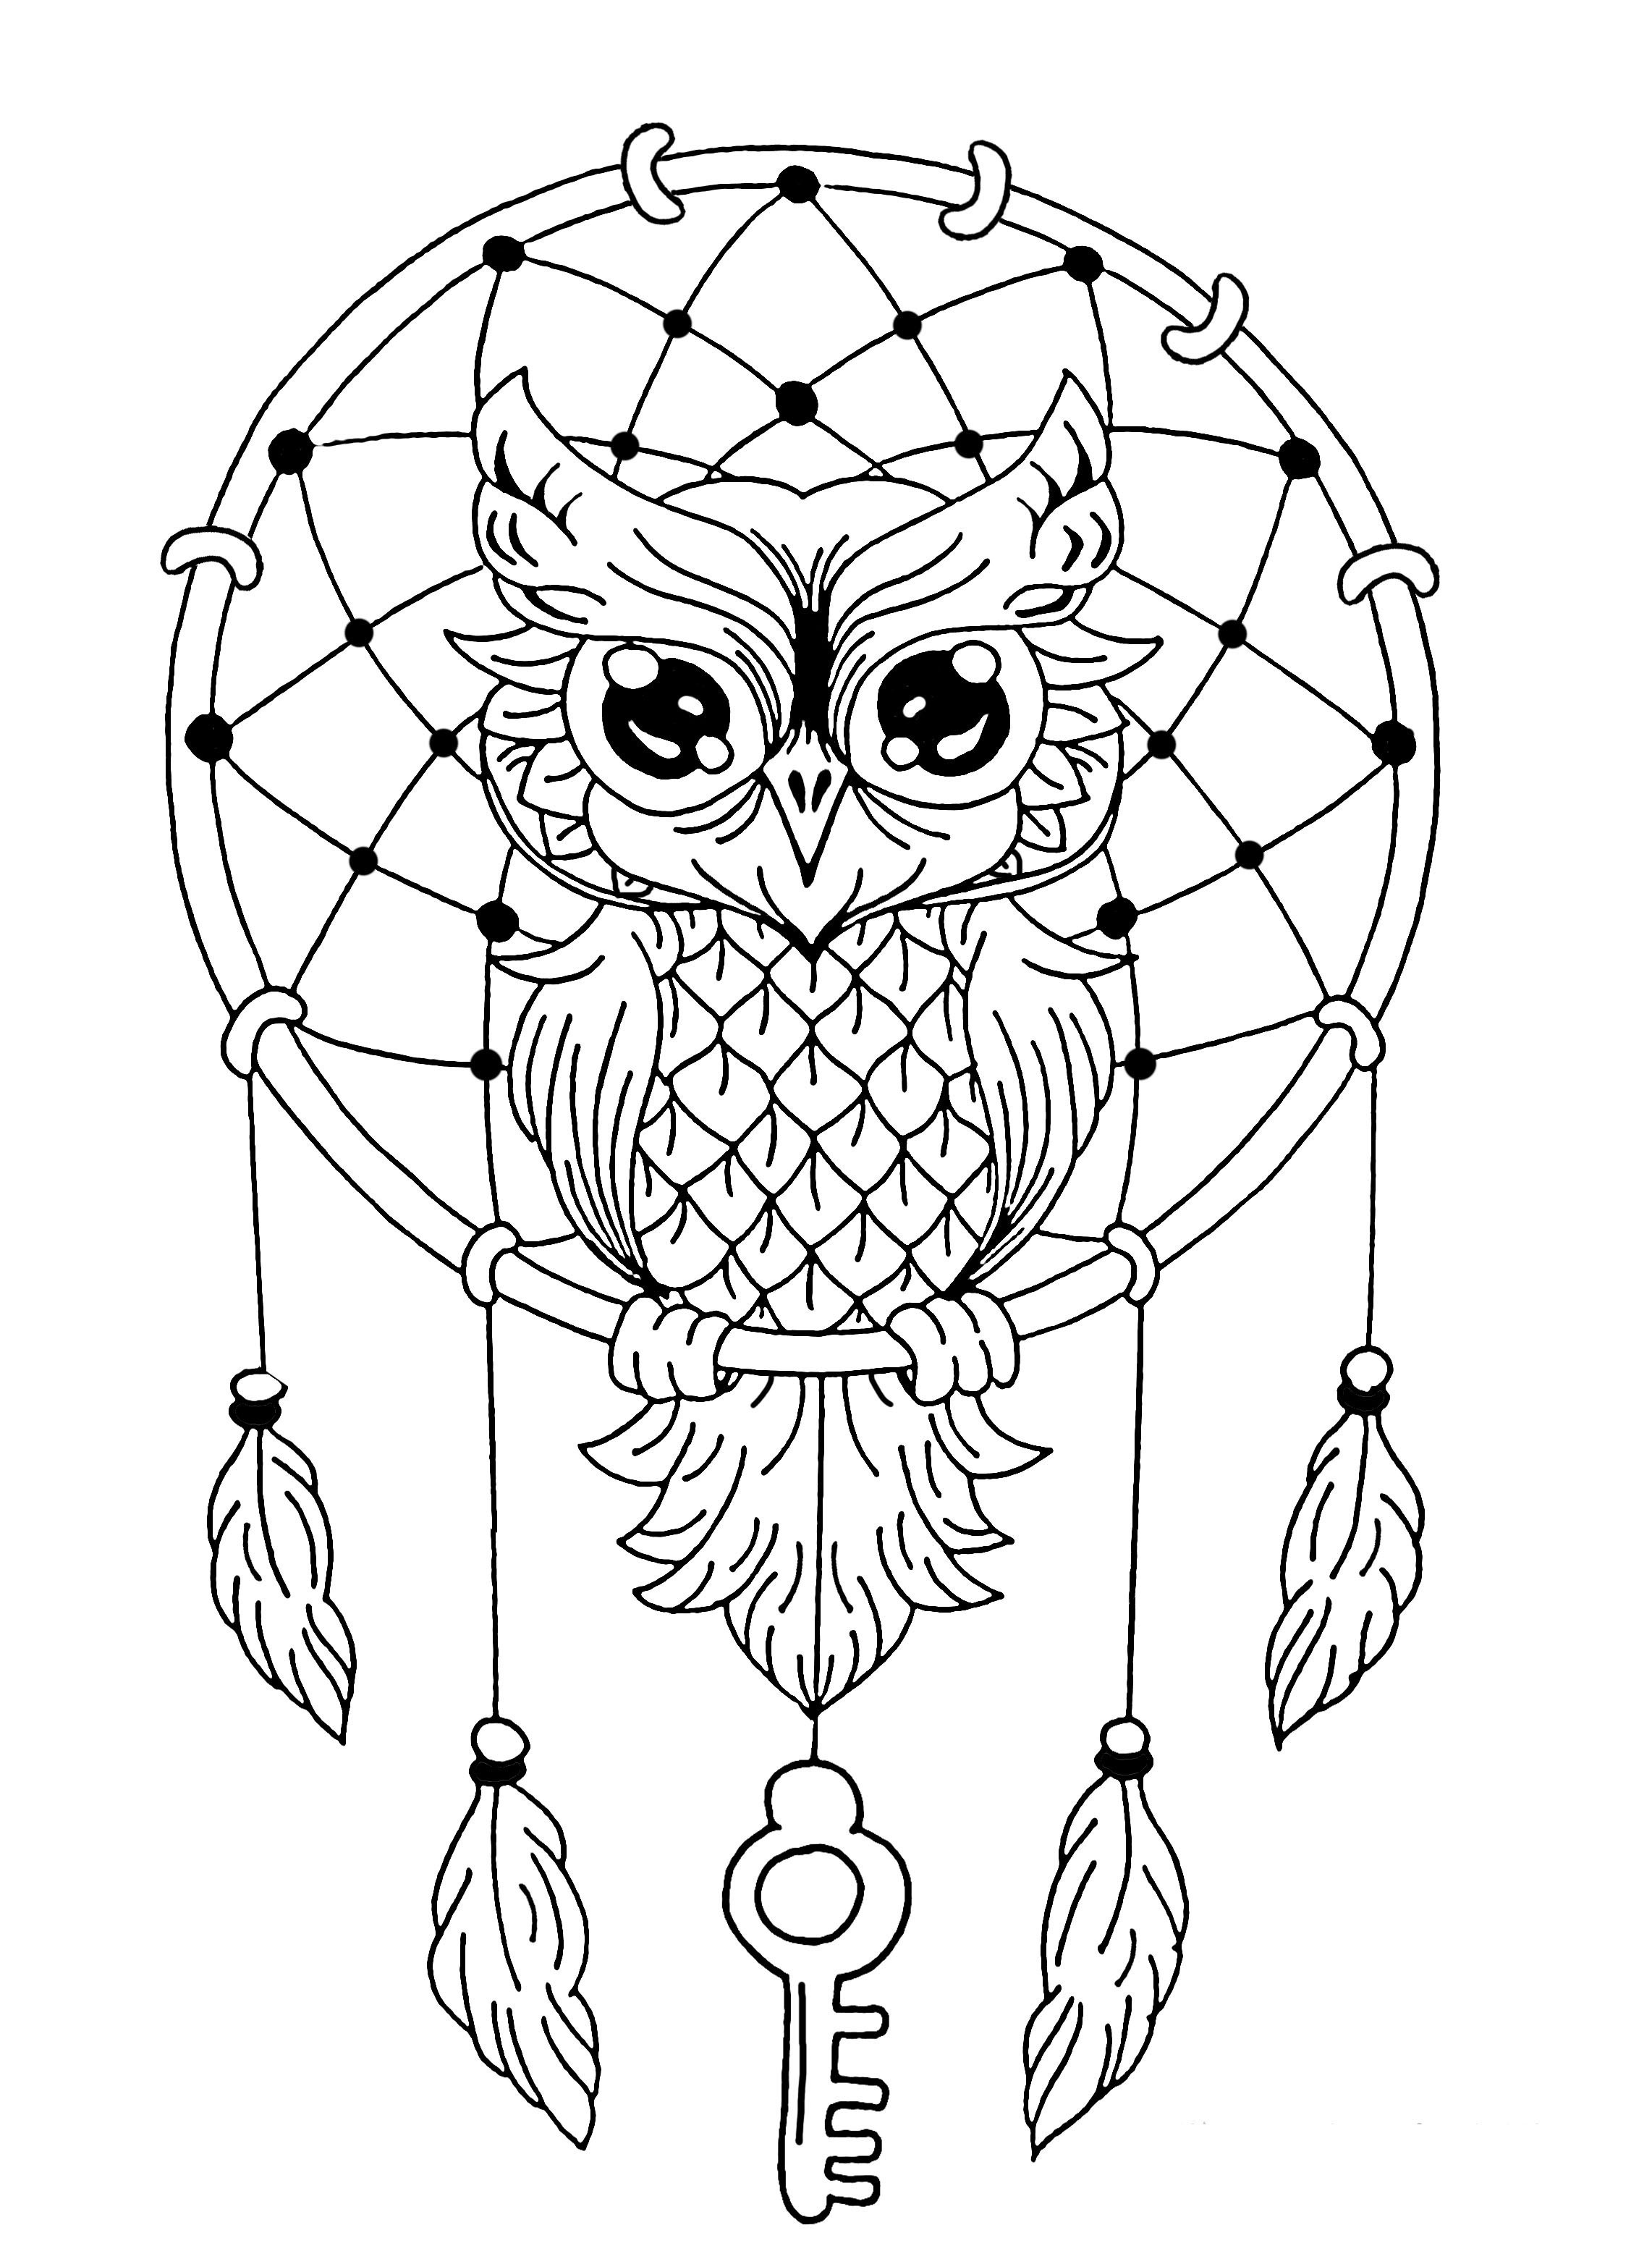 Hipster Girl Coloring Pages at GetDrawings Free download